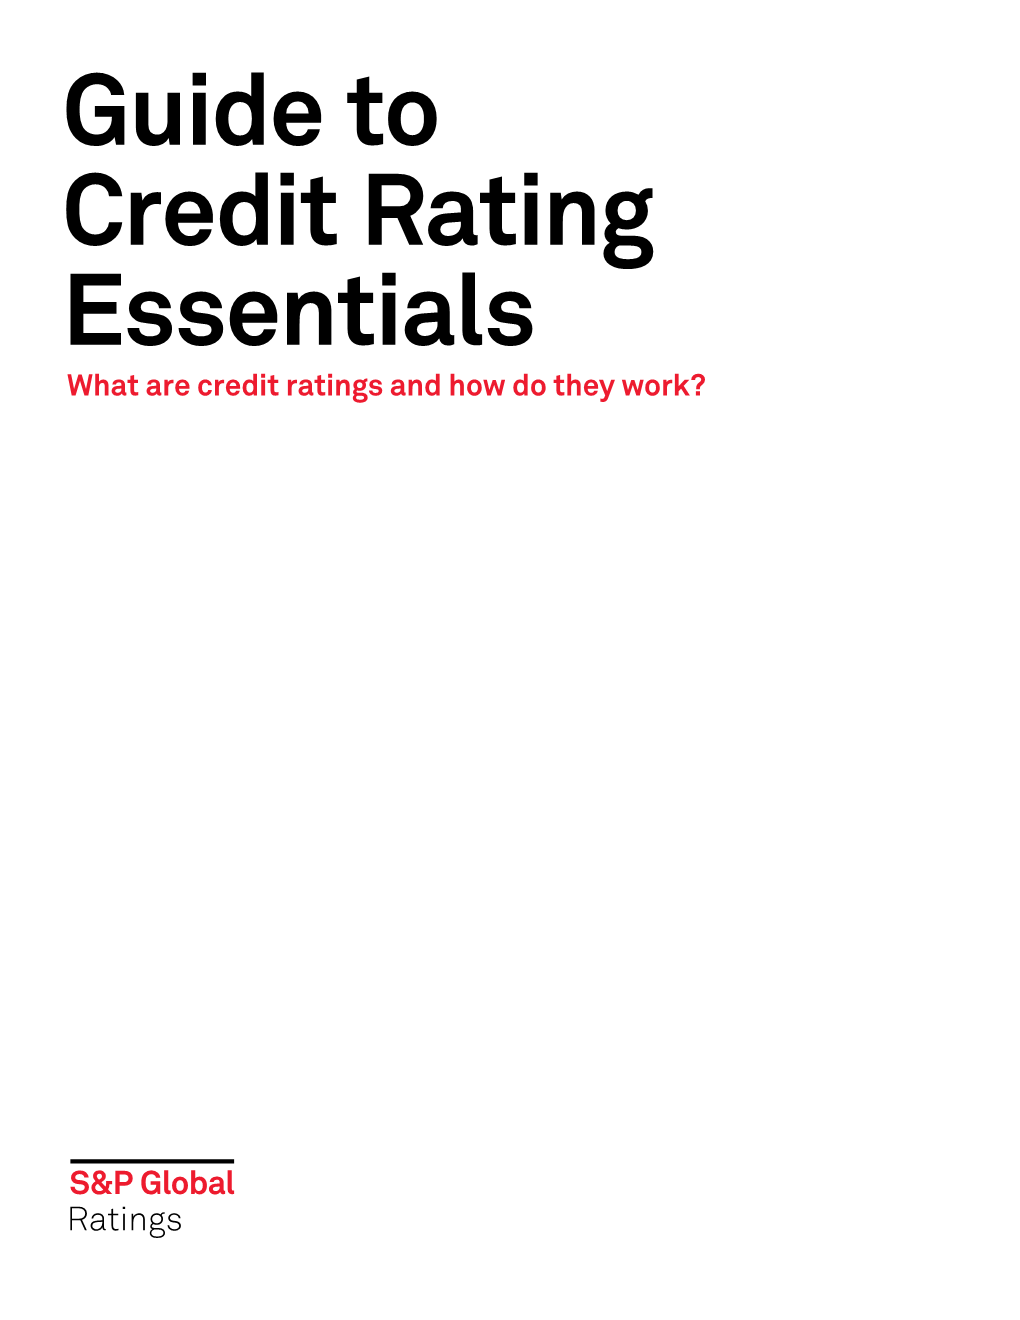 Guide to Credit Rating Essentials What Are Credit Ratings and How Do They Work? Guide to Credit Rating Essentials